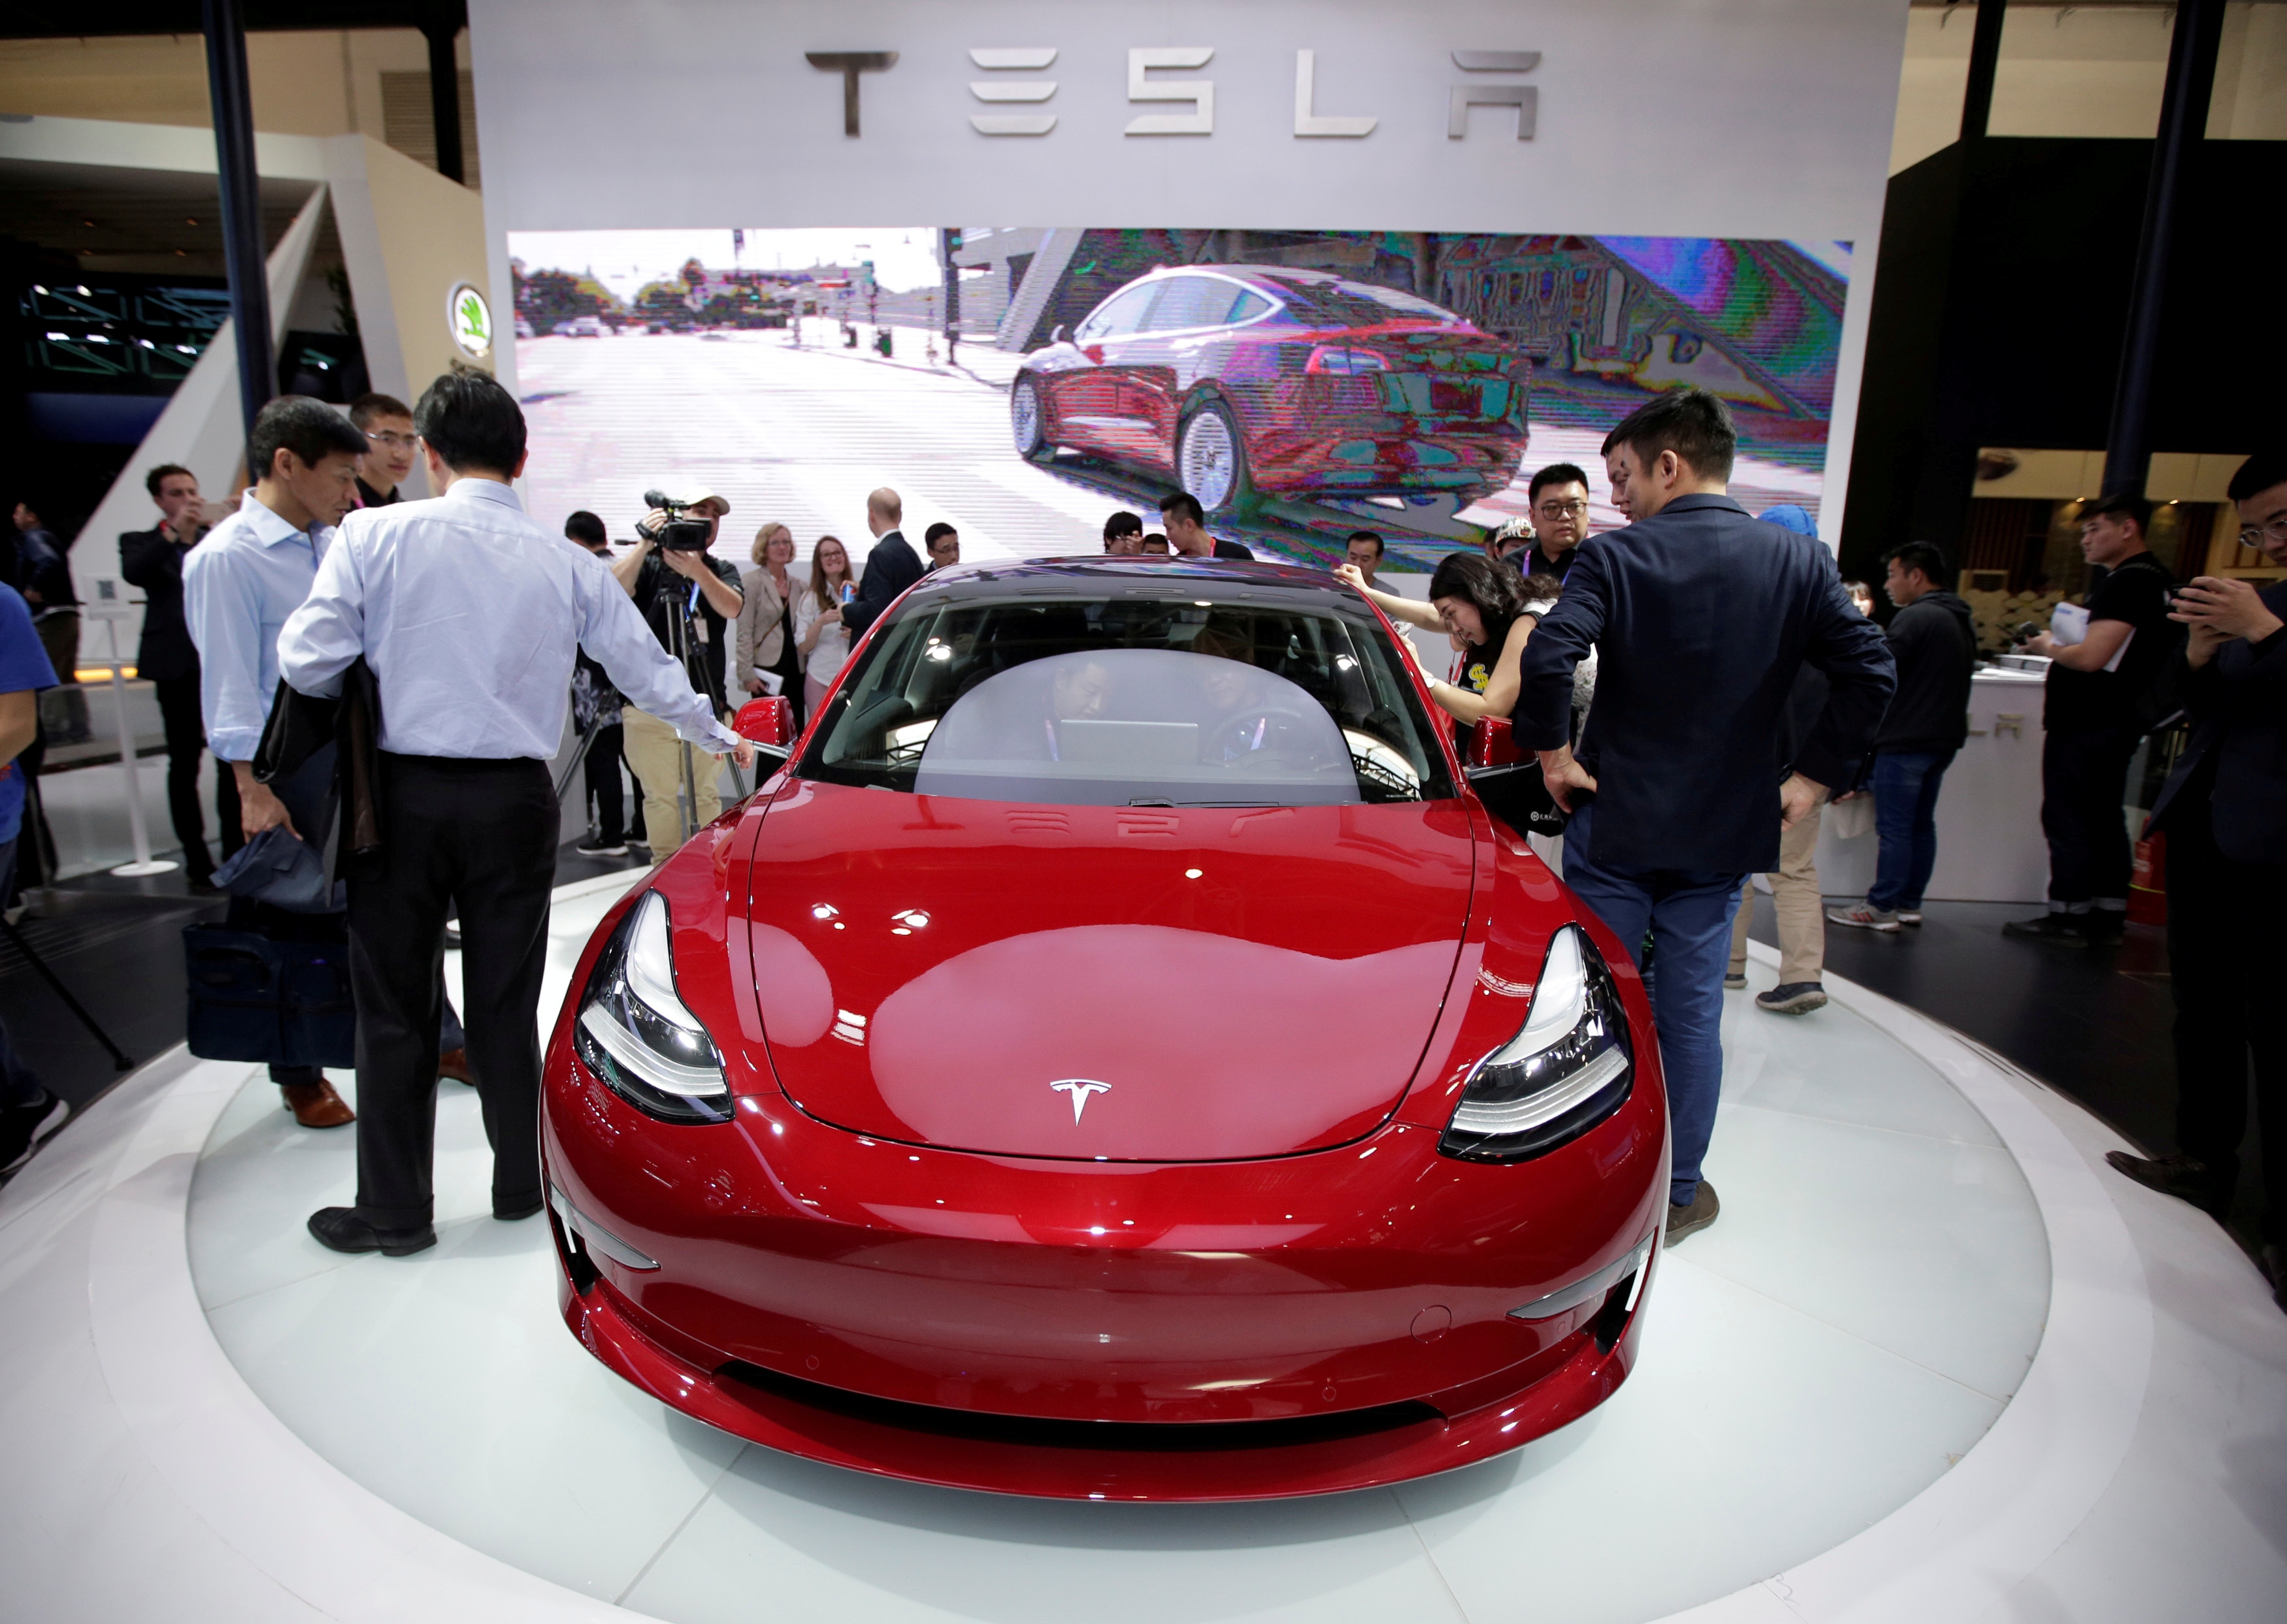 A Tesla Model 3 car is displayed during a media preview at the Auto China 2018 motor show in Beijing, China April 25, 2018. REUTERS/Jason Lee